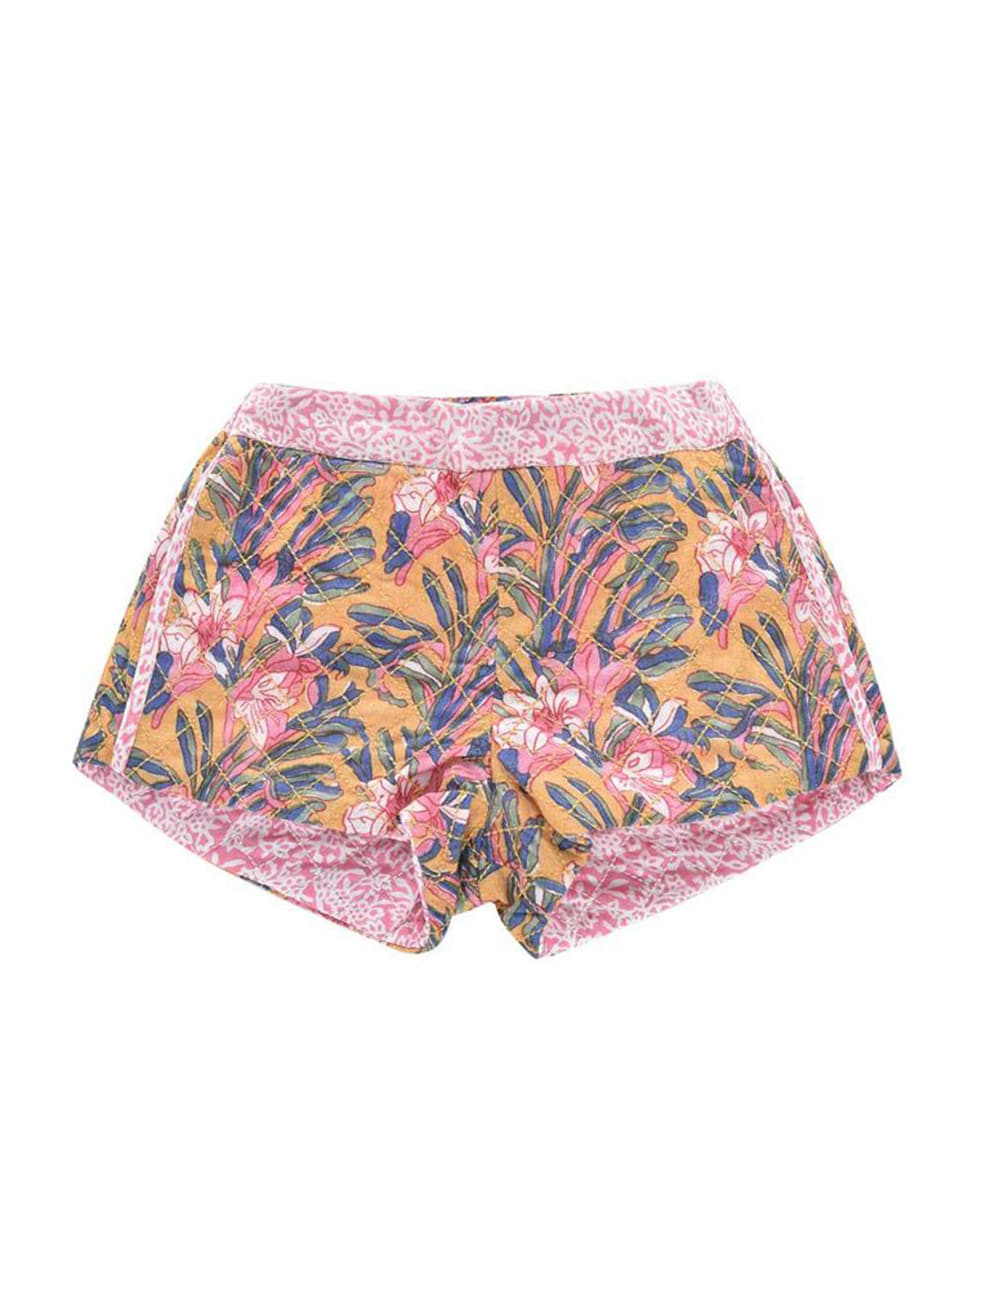 [SS22 LOUISE MISHA] SHORTS AMBROISE GRI-S22-S0756 - HONEY FLOWER/STAMP 3.4.6.8Y